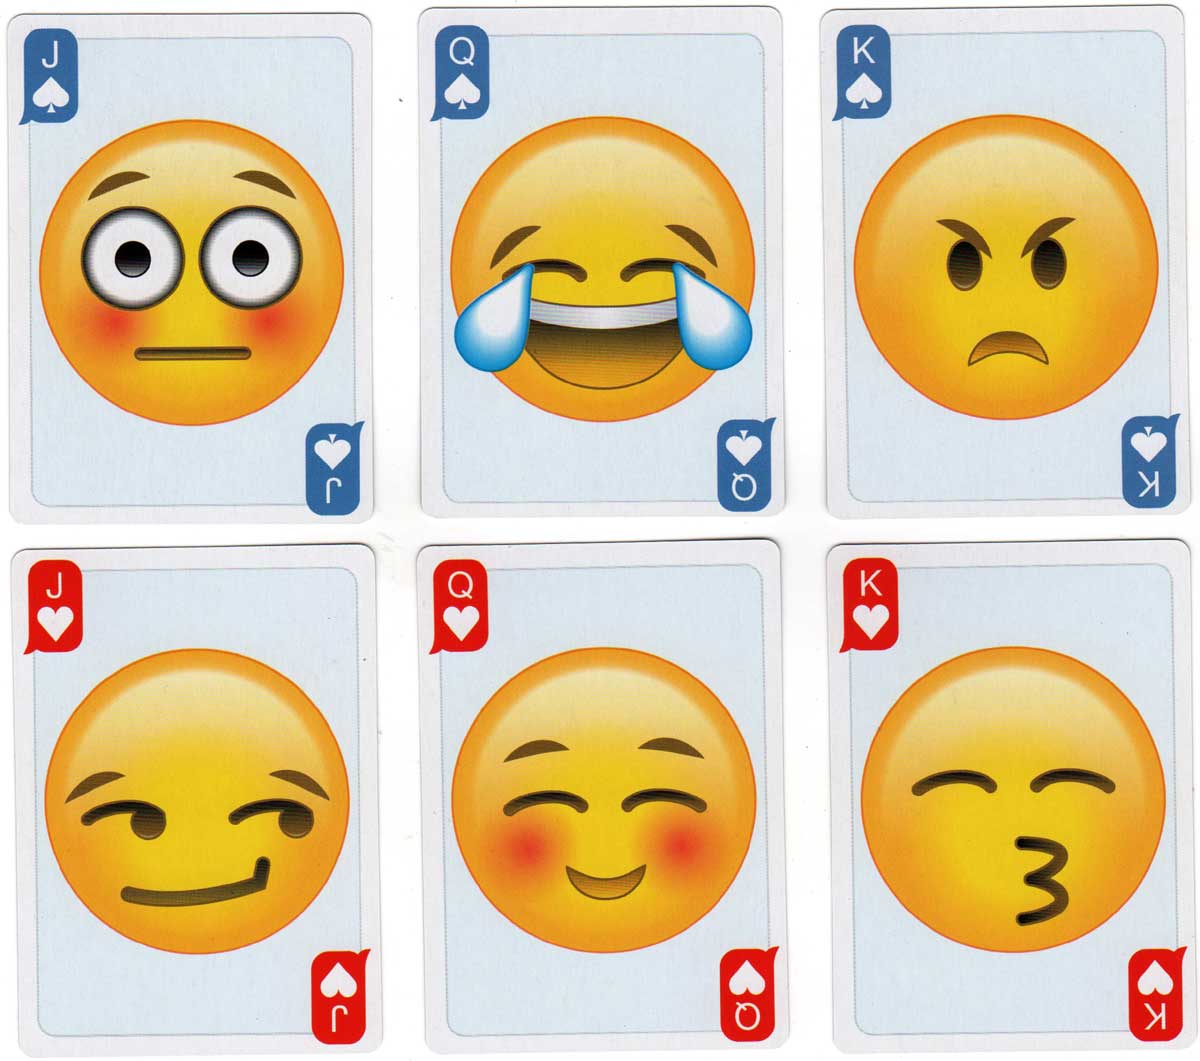 Emoticon playing cards designed by Buy Design Studios, 2016